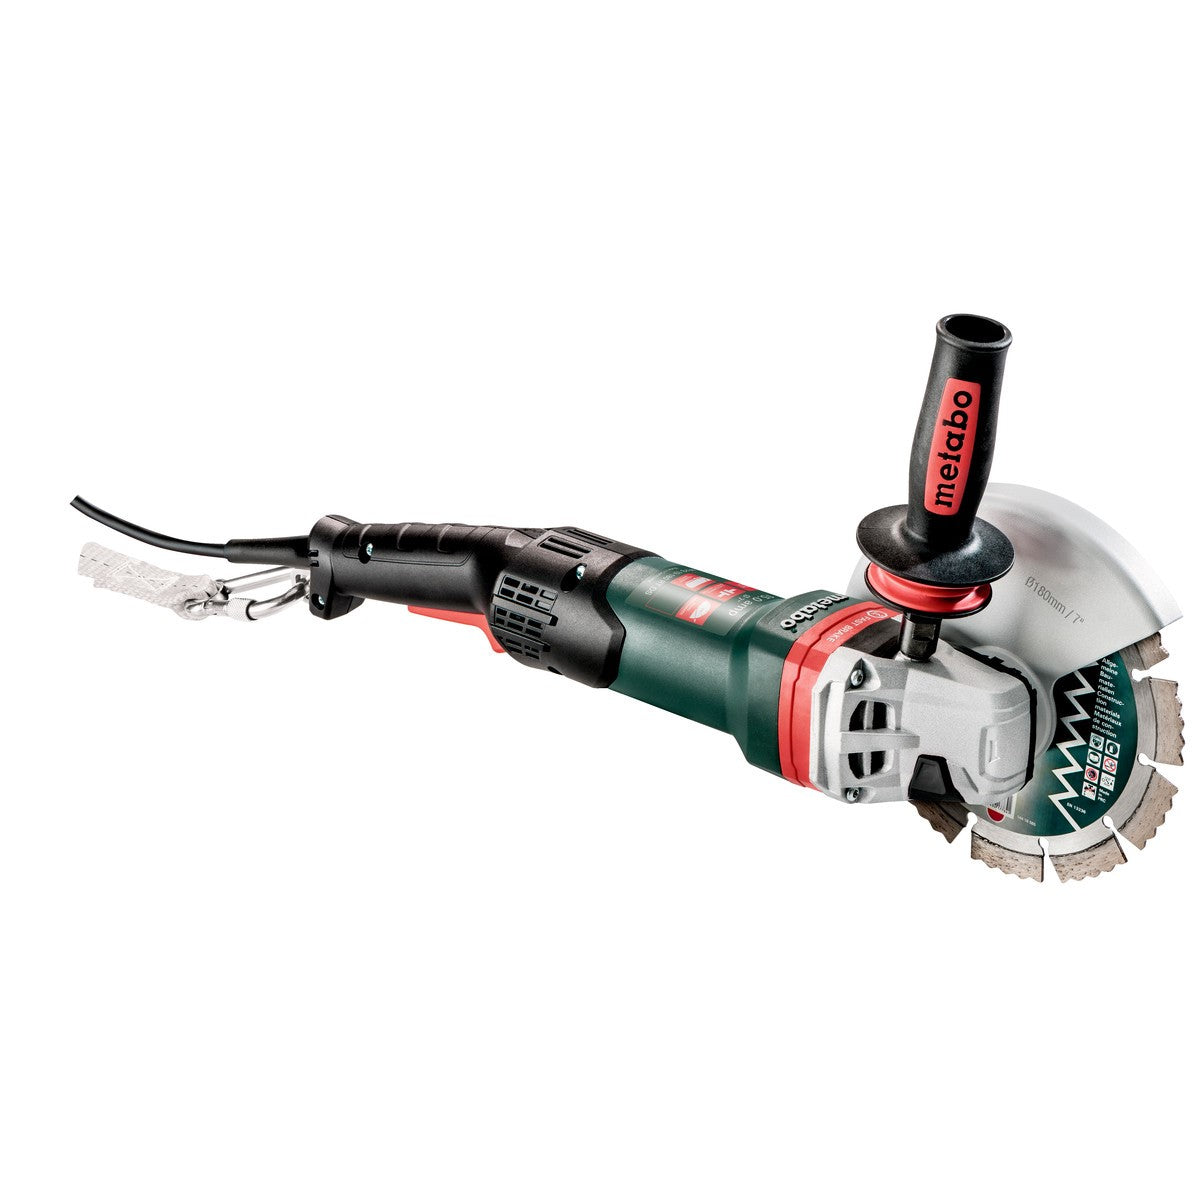 Metabo (601096420) 7 inch Rat Tail Angle Grinder wNonLock Paddle Switch Brake TC Electronics & Drop Secure 15 Amp image 1 of 3 image 2 of 3